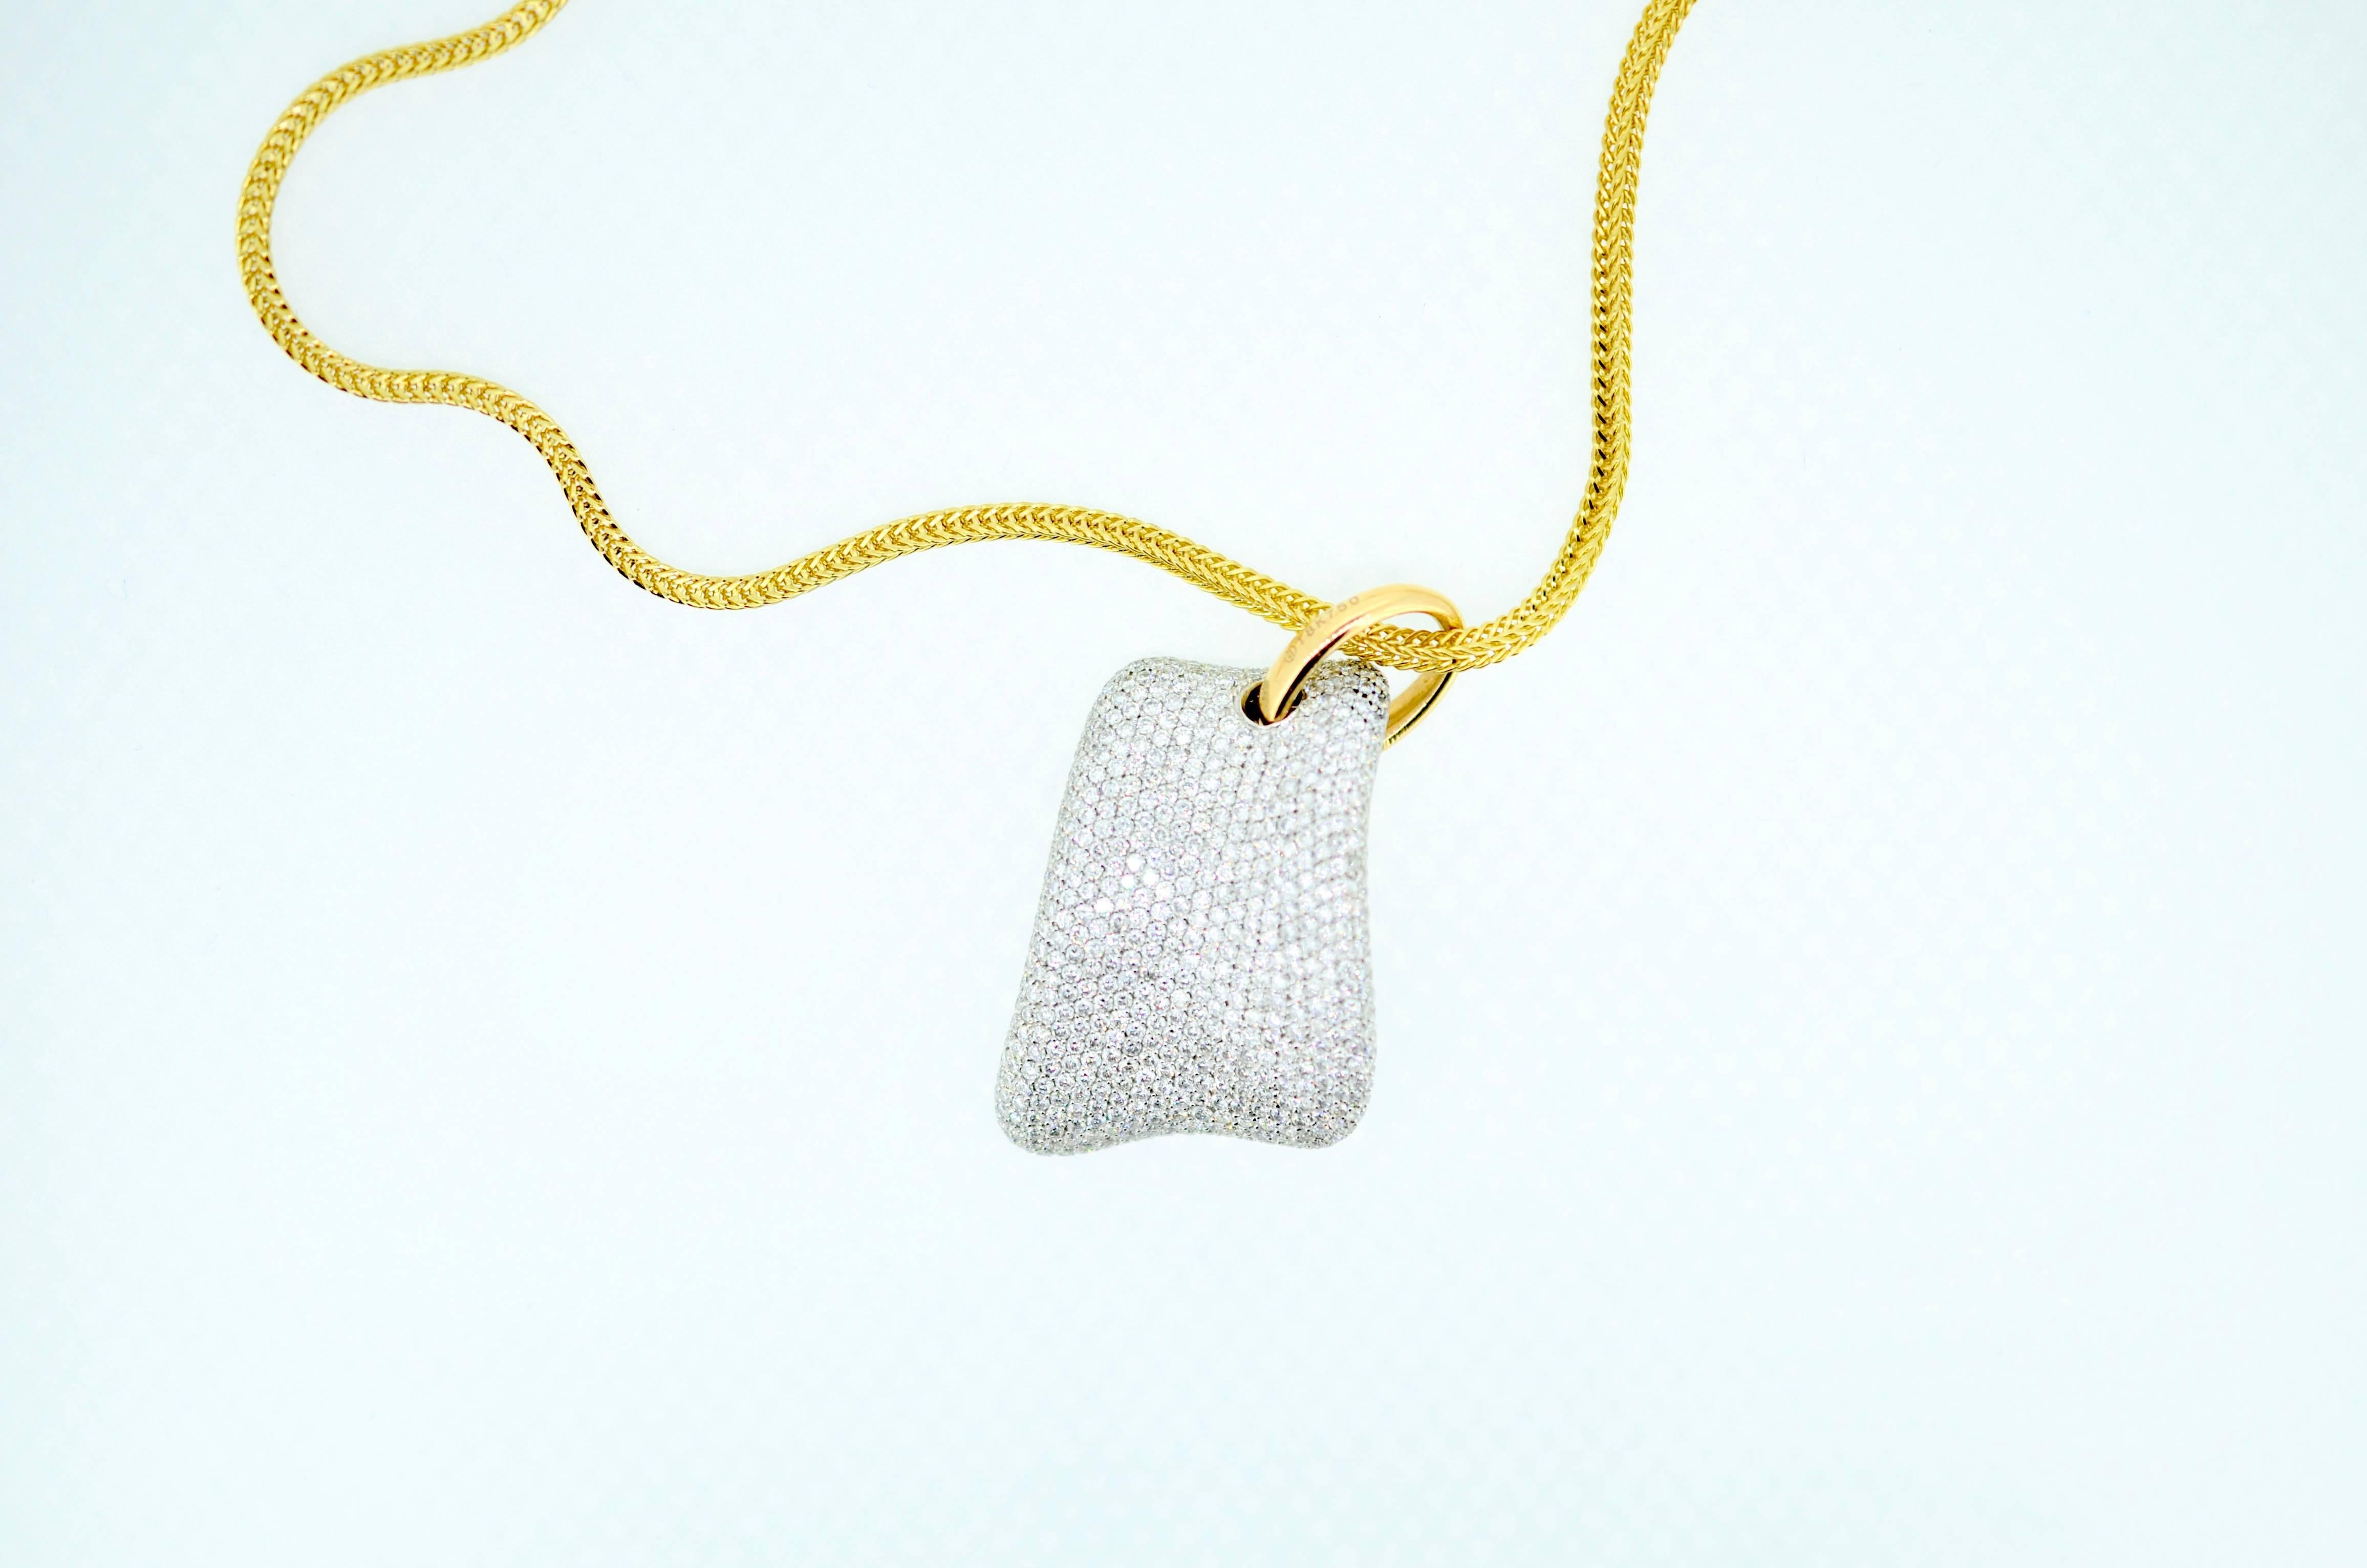 Diamond Puff Pillow Pendant. Diamonds pave set in asymmetrical 18kt. white gold. Suspends on 18kt gold ring and 18kt gold square 2.75mm snake chain. Pillow 1.38 inches by .75 inches by 4.5mm deep. Approximately 3.0ct total weight. VS2 clarity, G-H